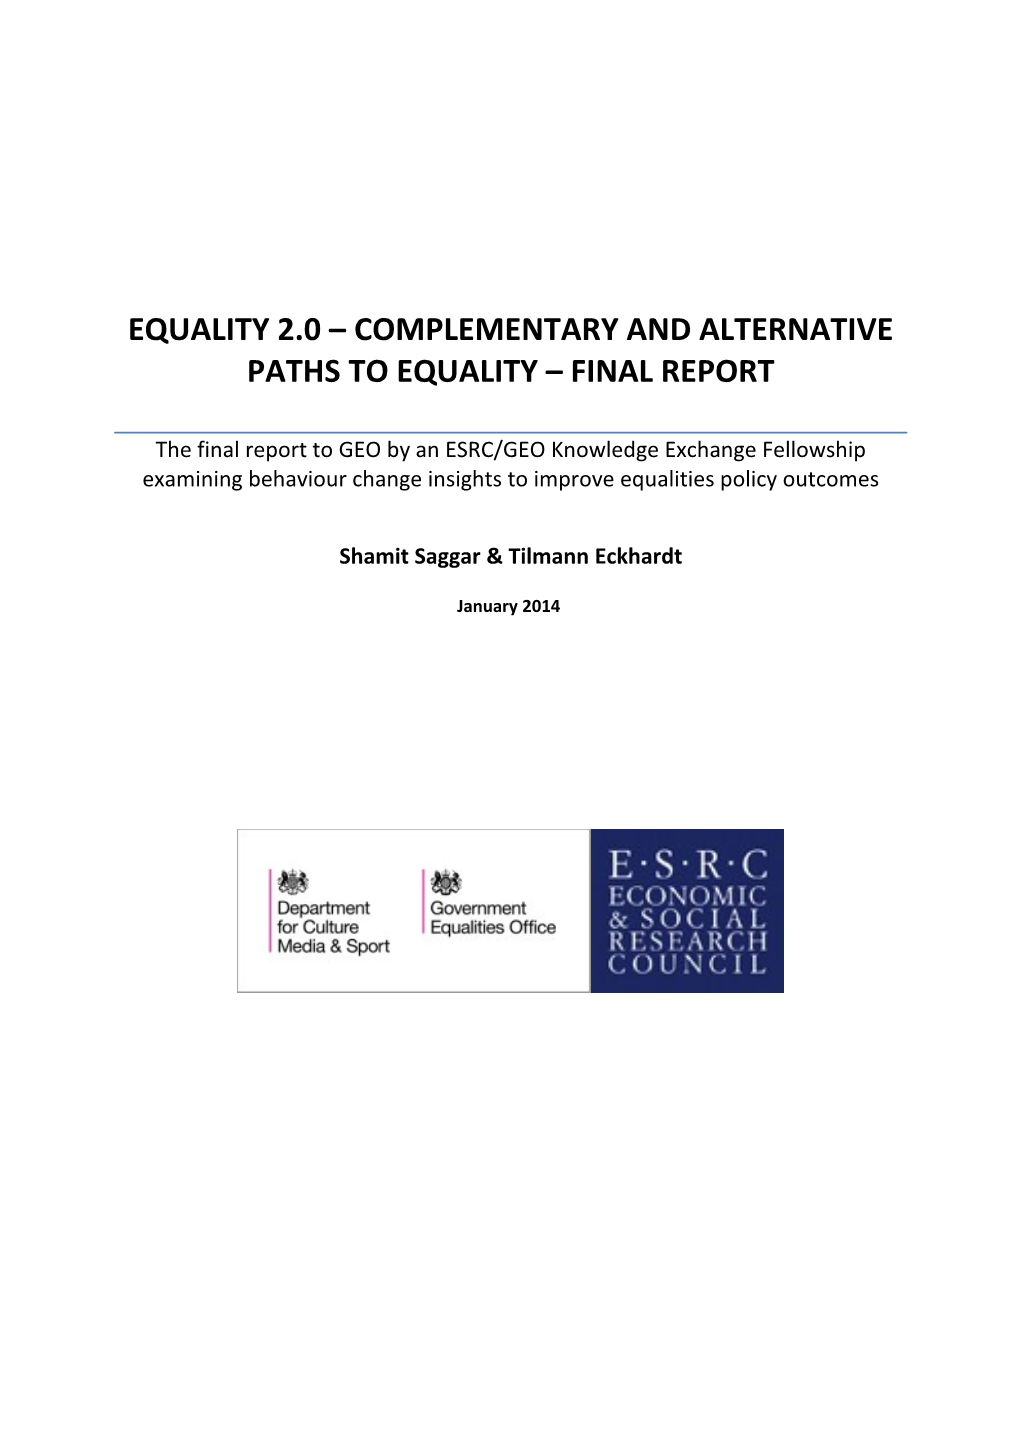 Equality 2.0 Complementary and Alternative Paths to Equality Final Report